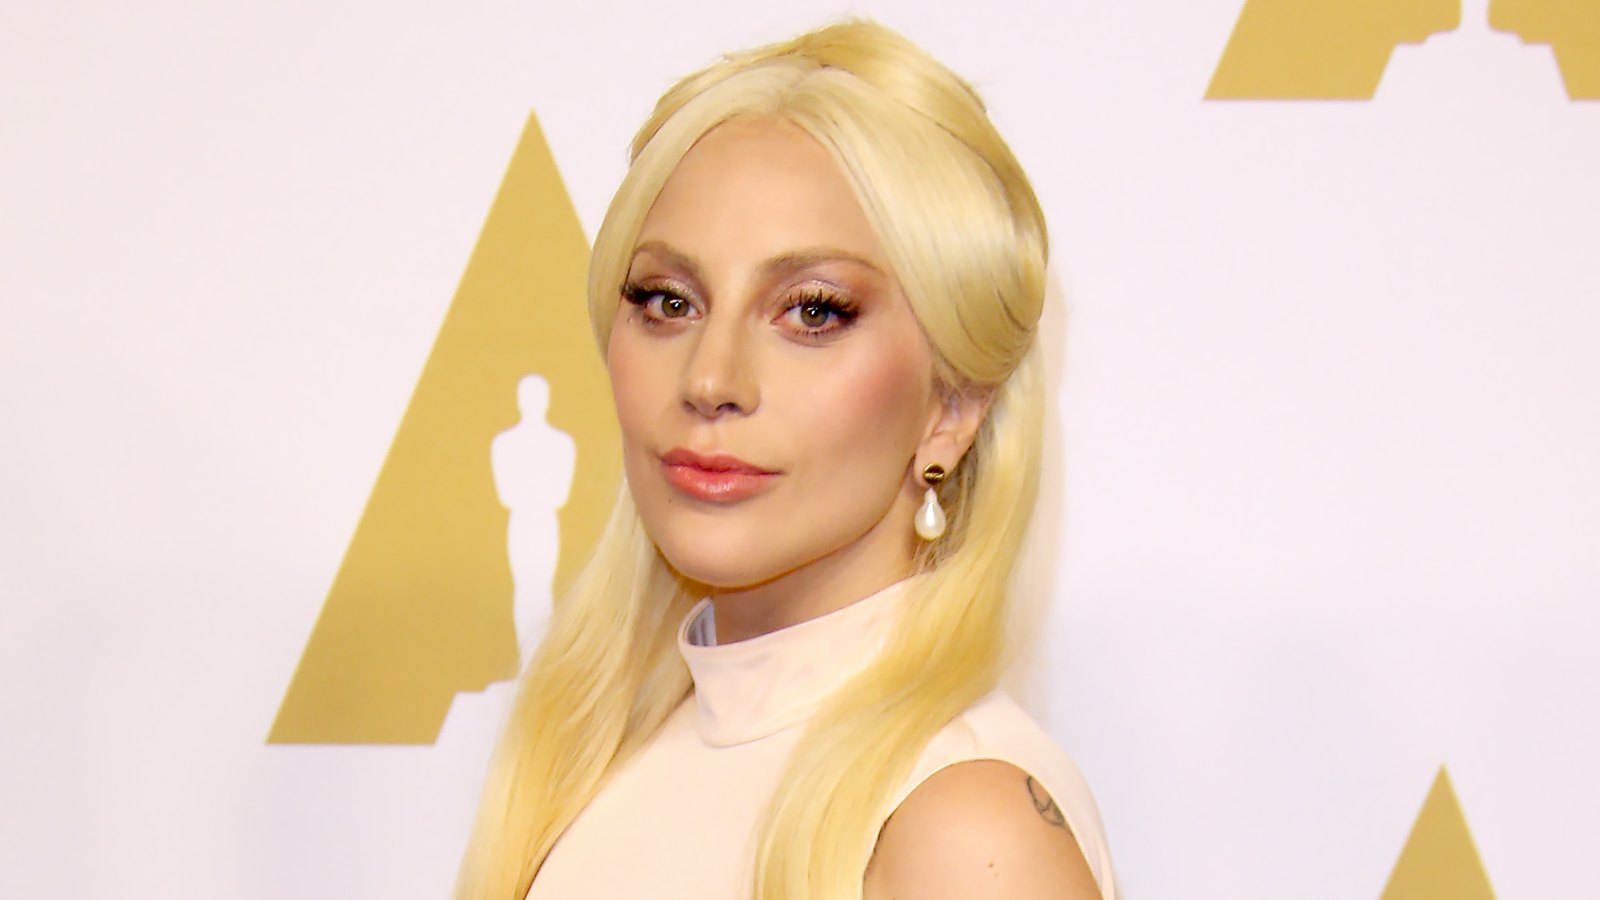 BEVERLY HILLS, CA - FEBRUARY 8: Singer/actress Lady Gaga attends the 88th Annual Academy Awards Nominee Luncheon in Beverly Hills, California.